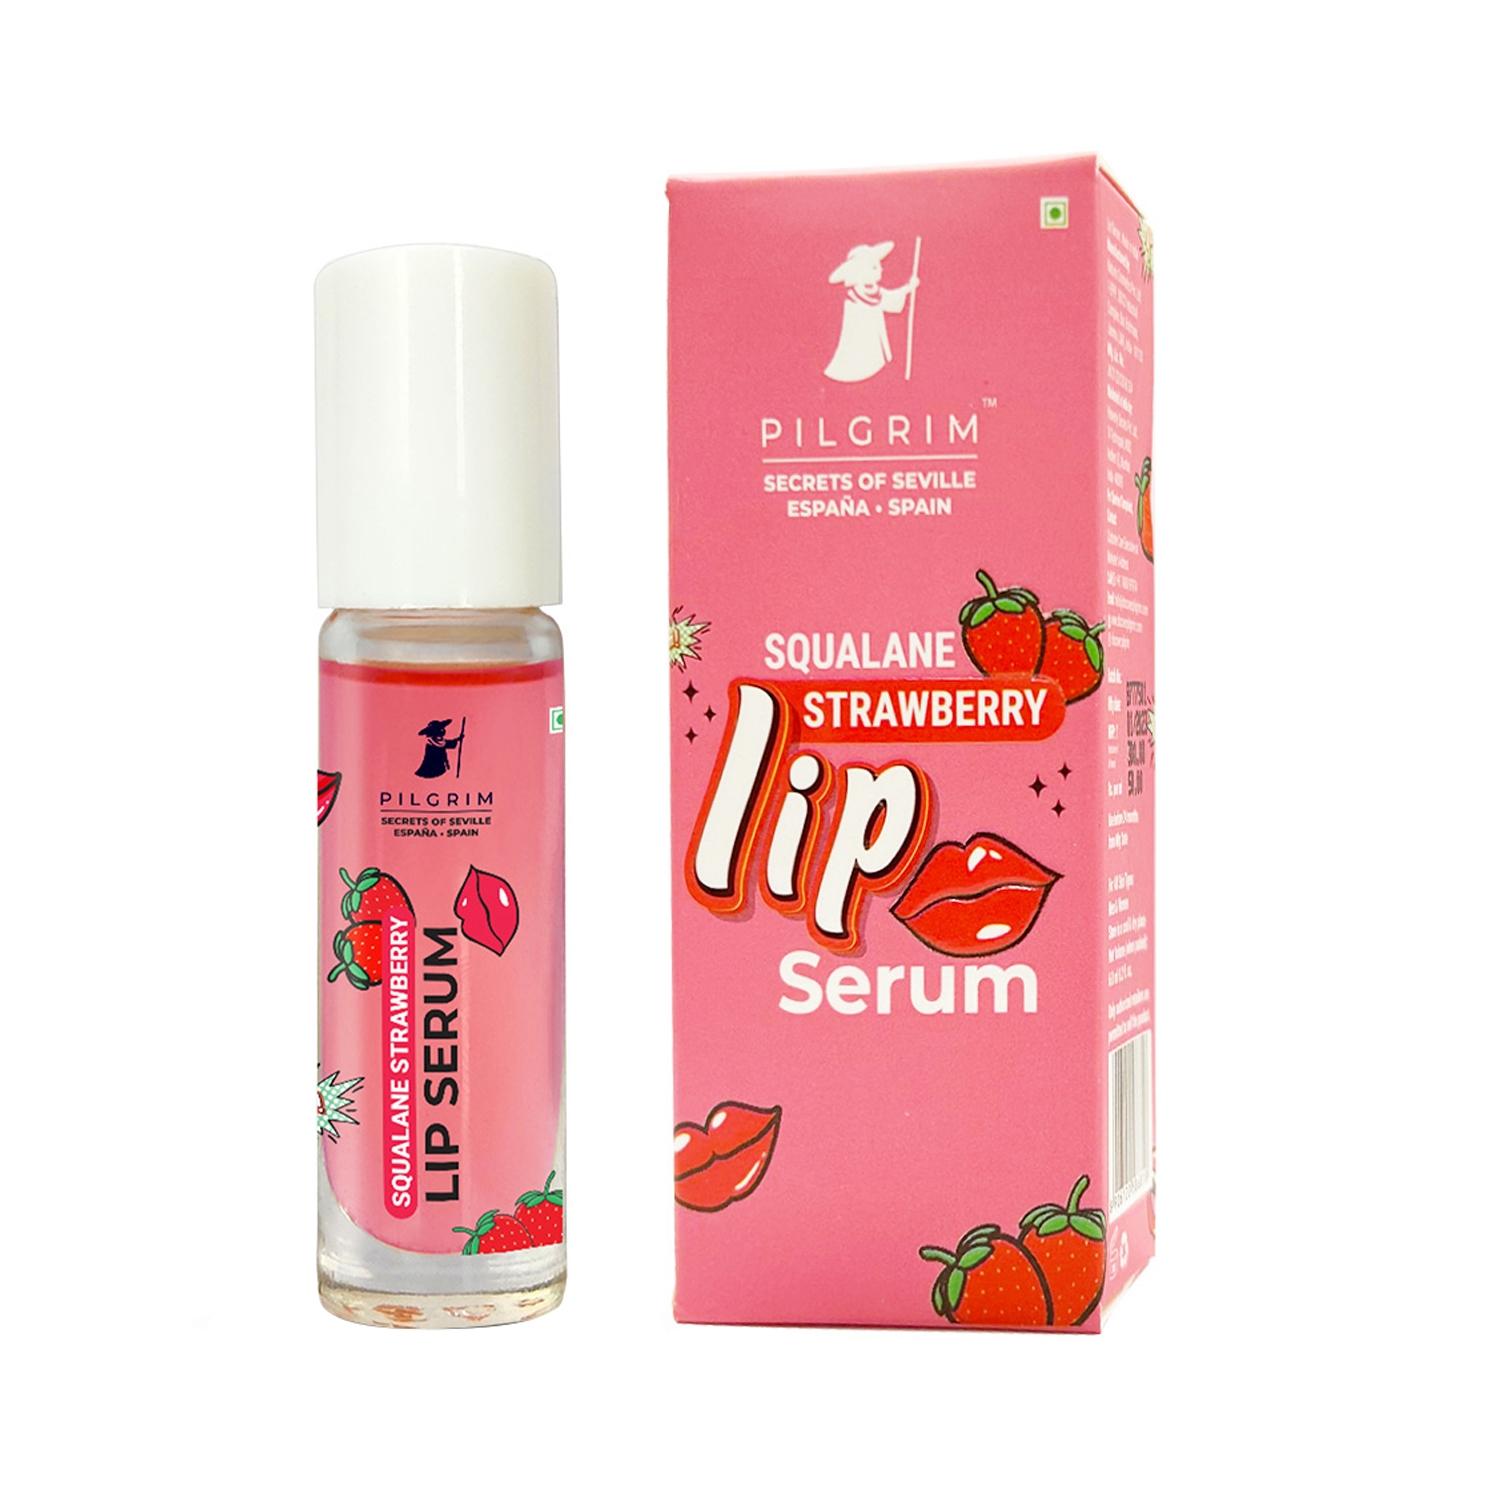 pilgrim squalane strawberry lip serum with roll on for visibly plump & supple lips (6ml)